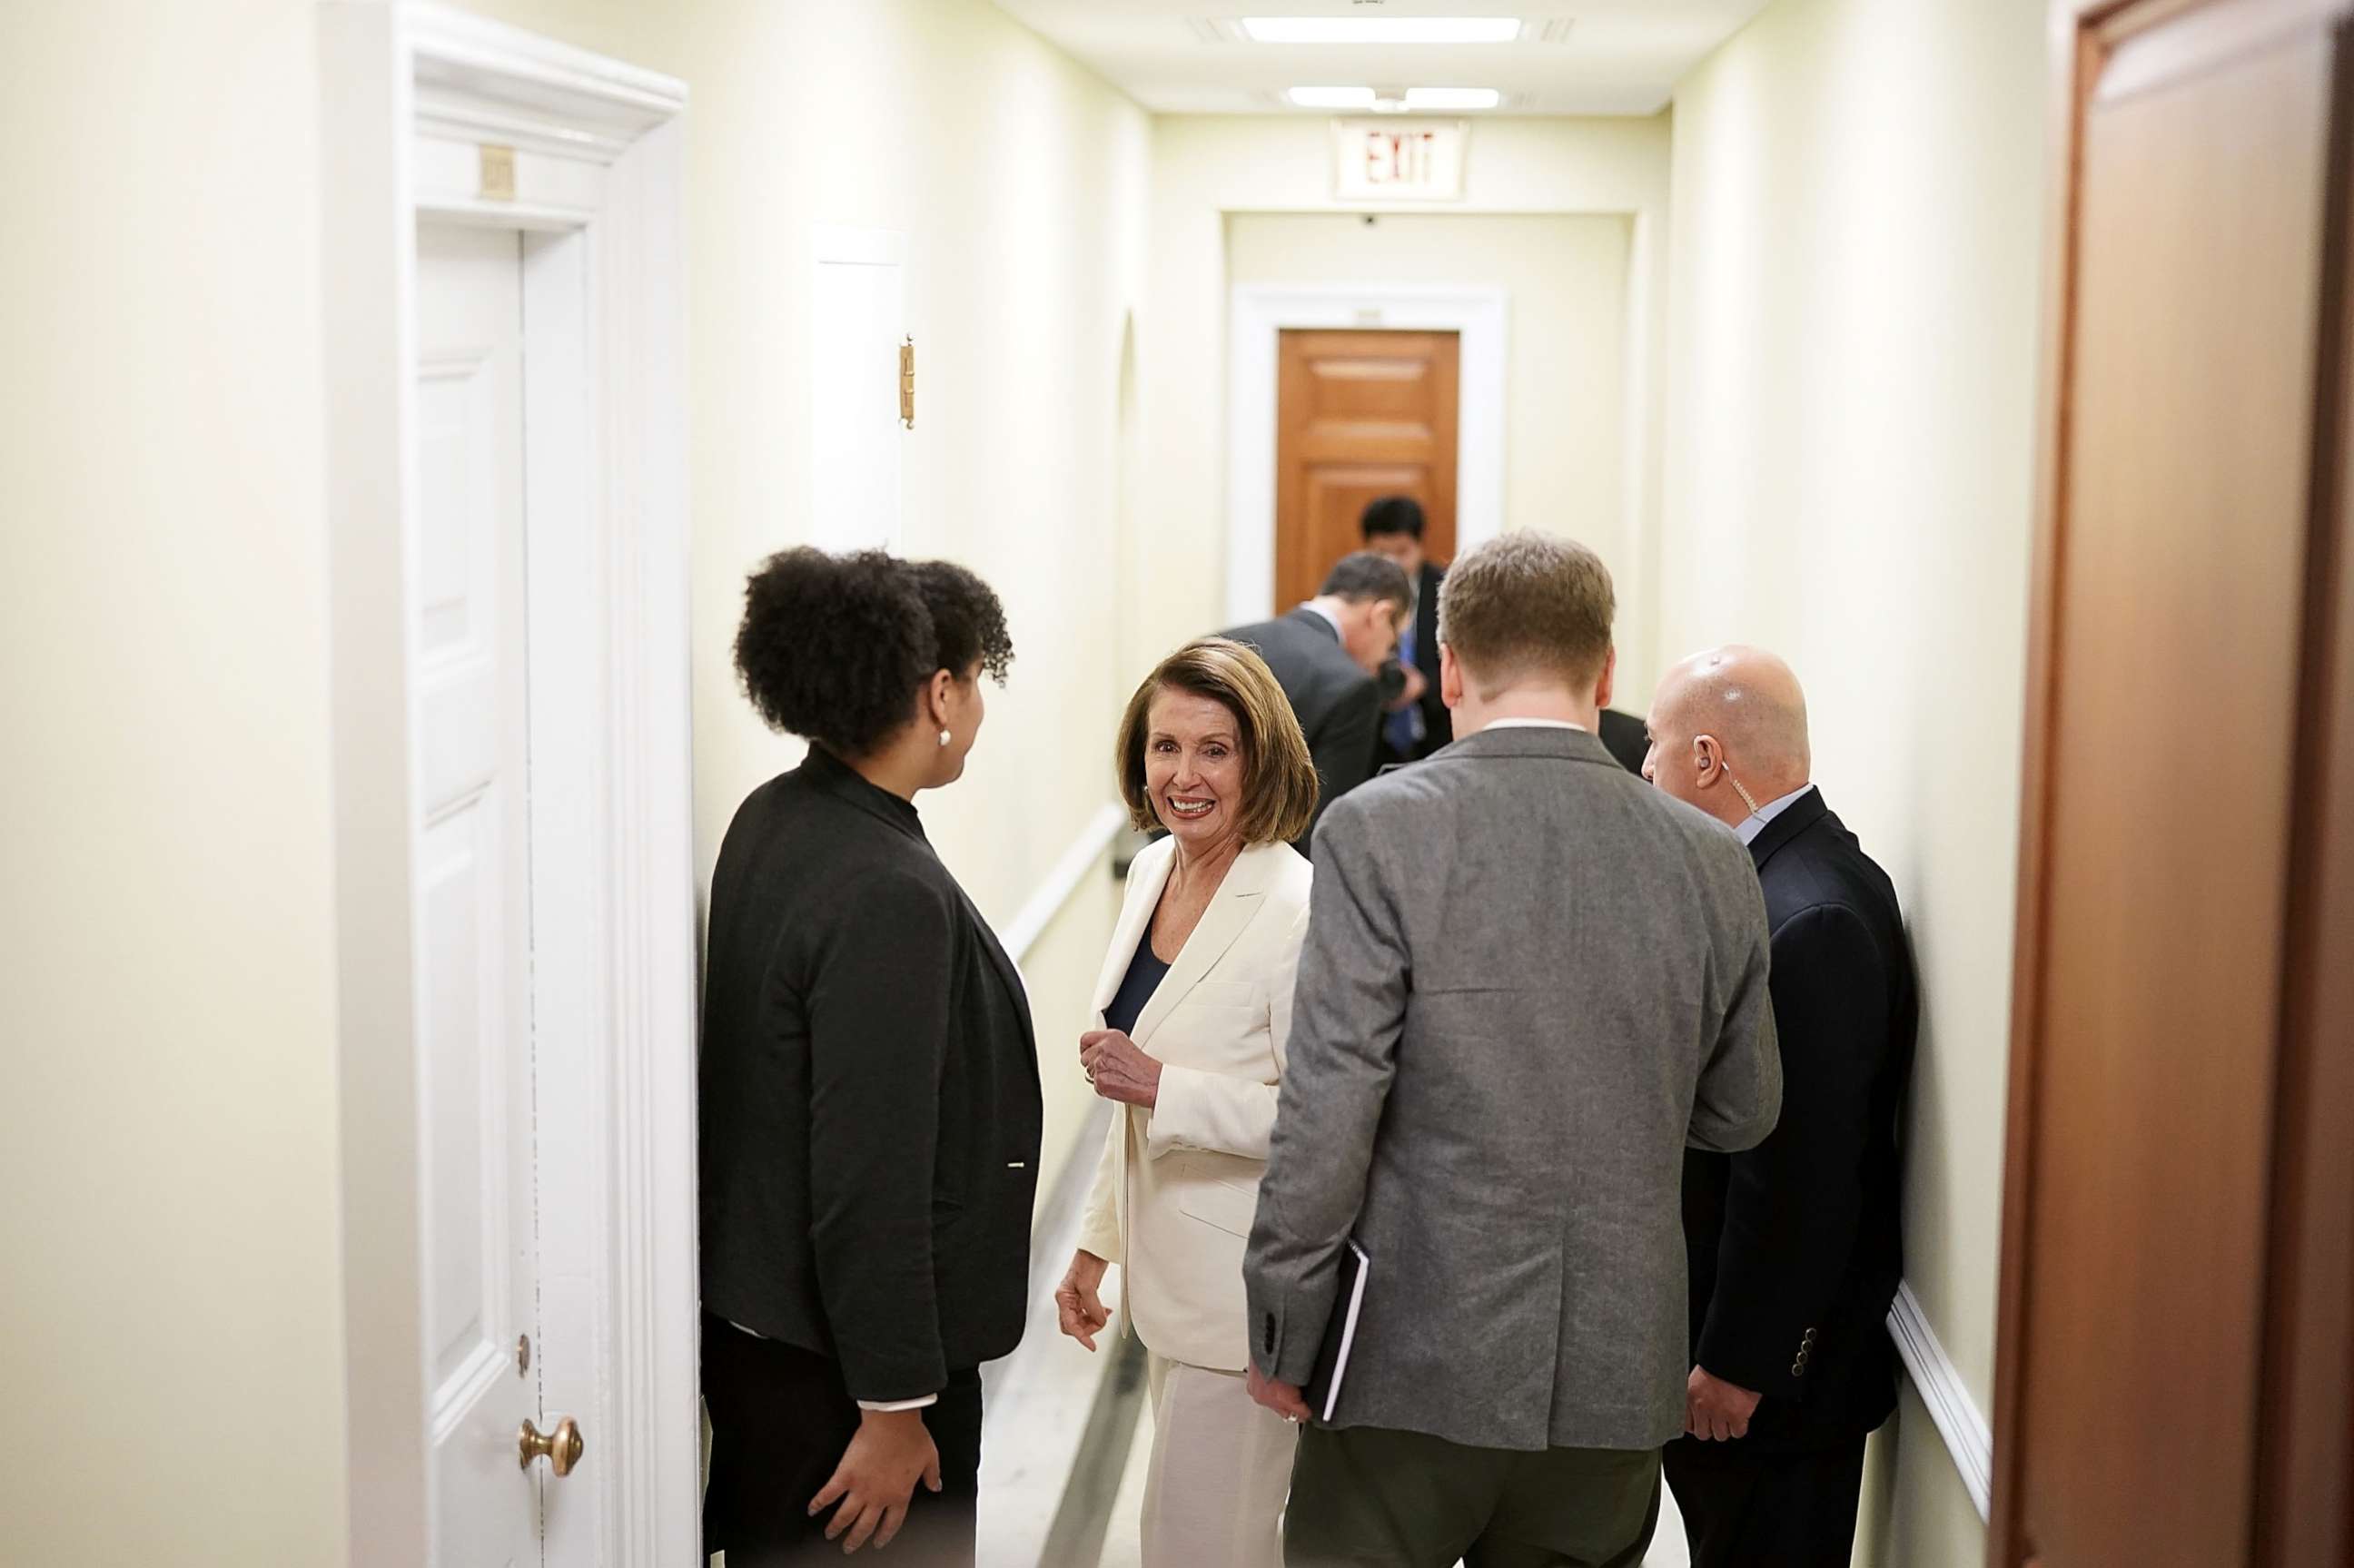 PHOTO: House Minority Leader Rep. Nancy Pelosi (D-CA) (C) on her way returns to her office after a long speech on immigration at the Capitol, Feb. 7, 2018.